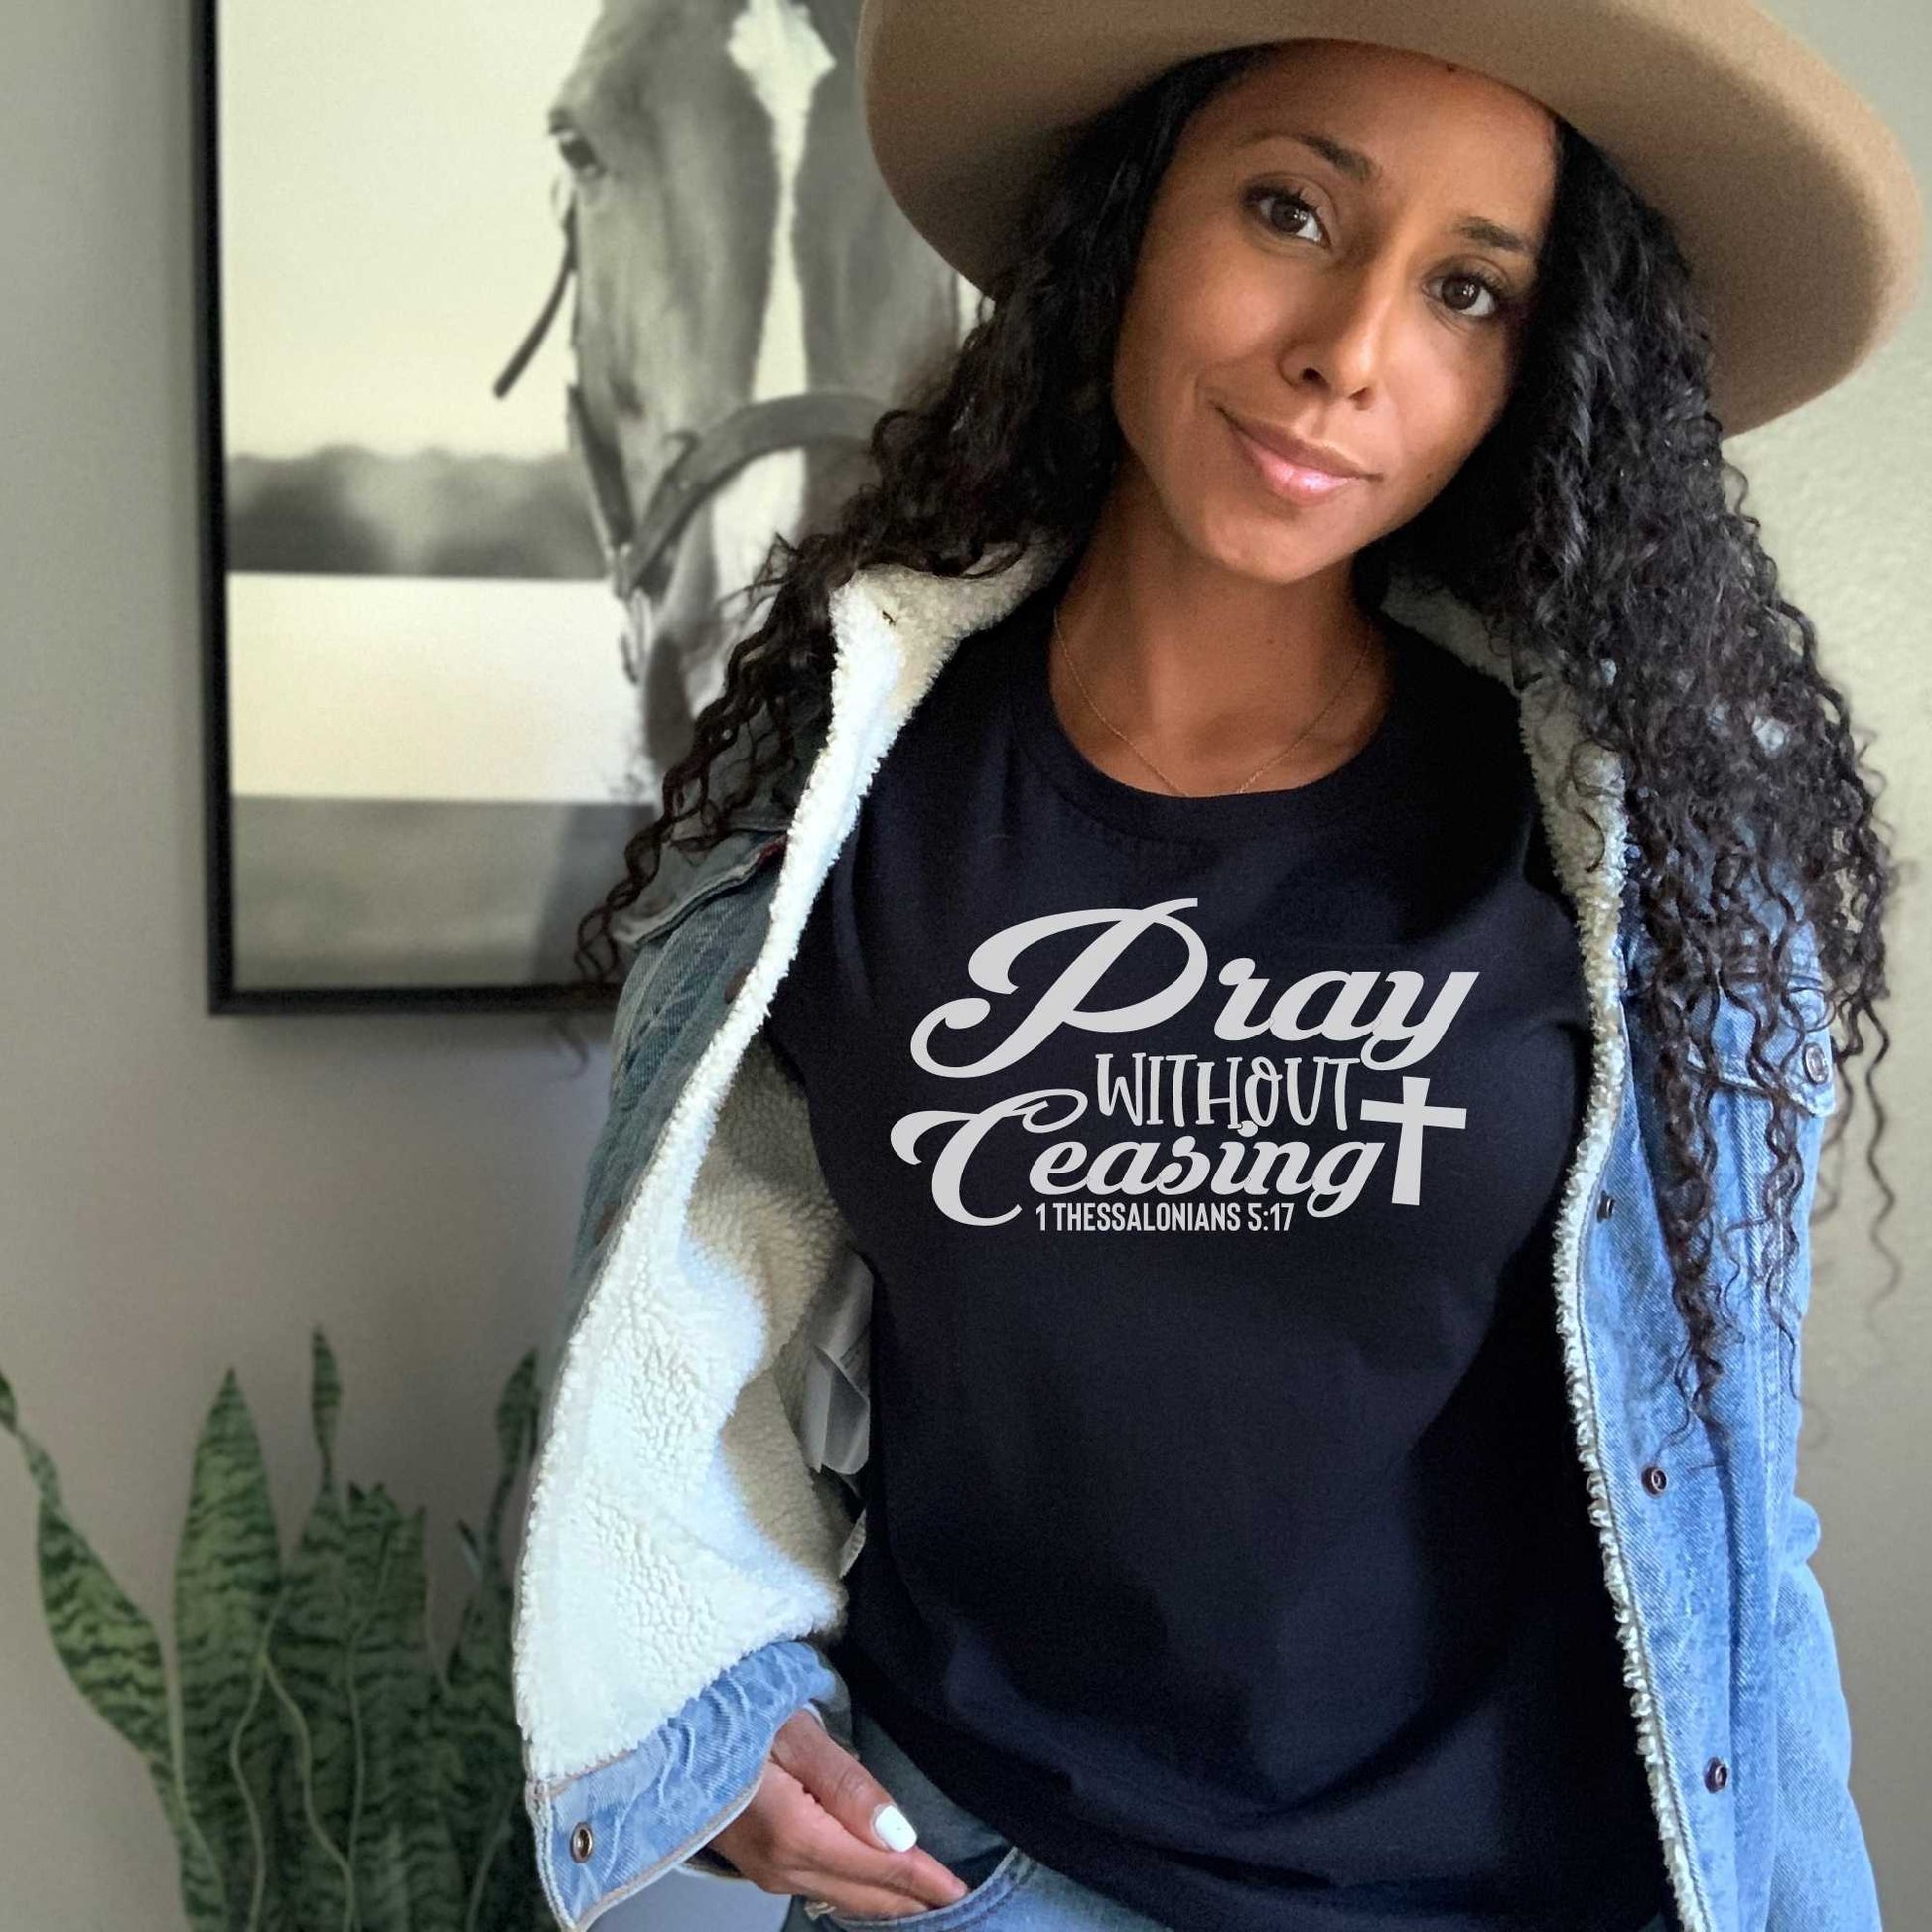 Pray Without Ceasing, Christian Shirts for Women